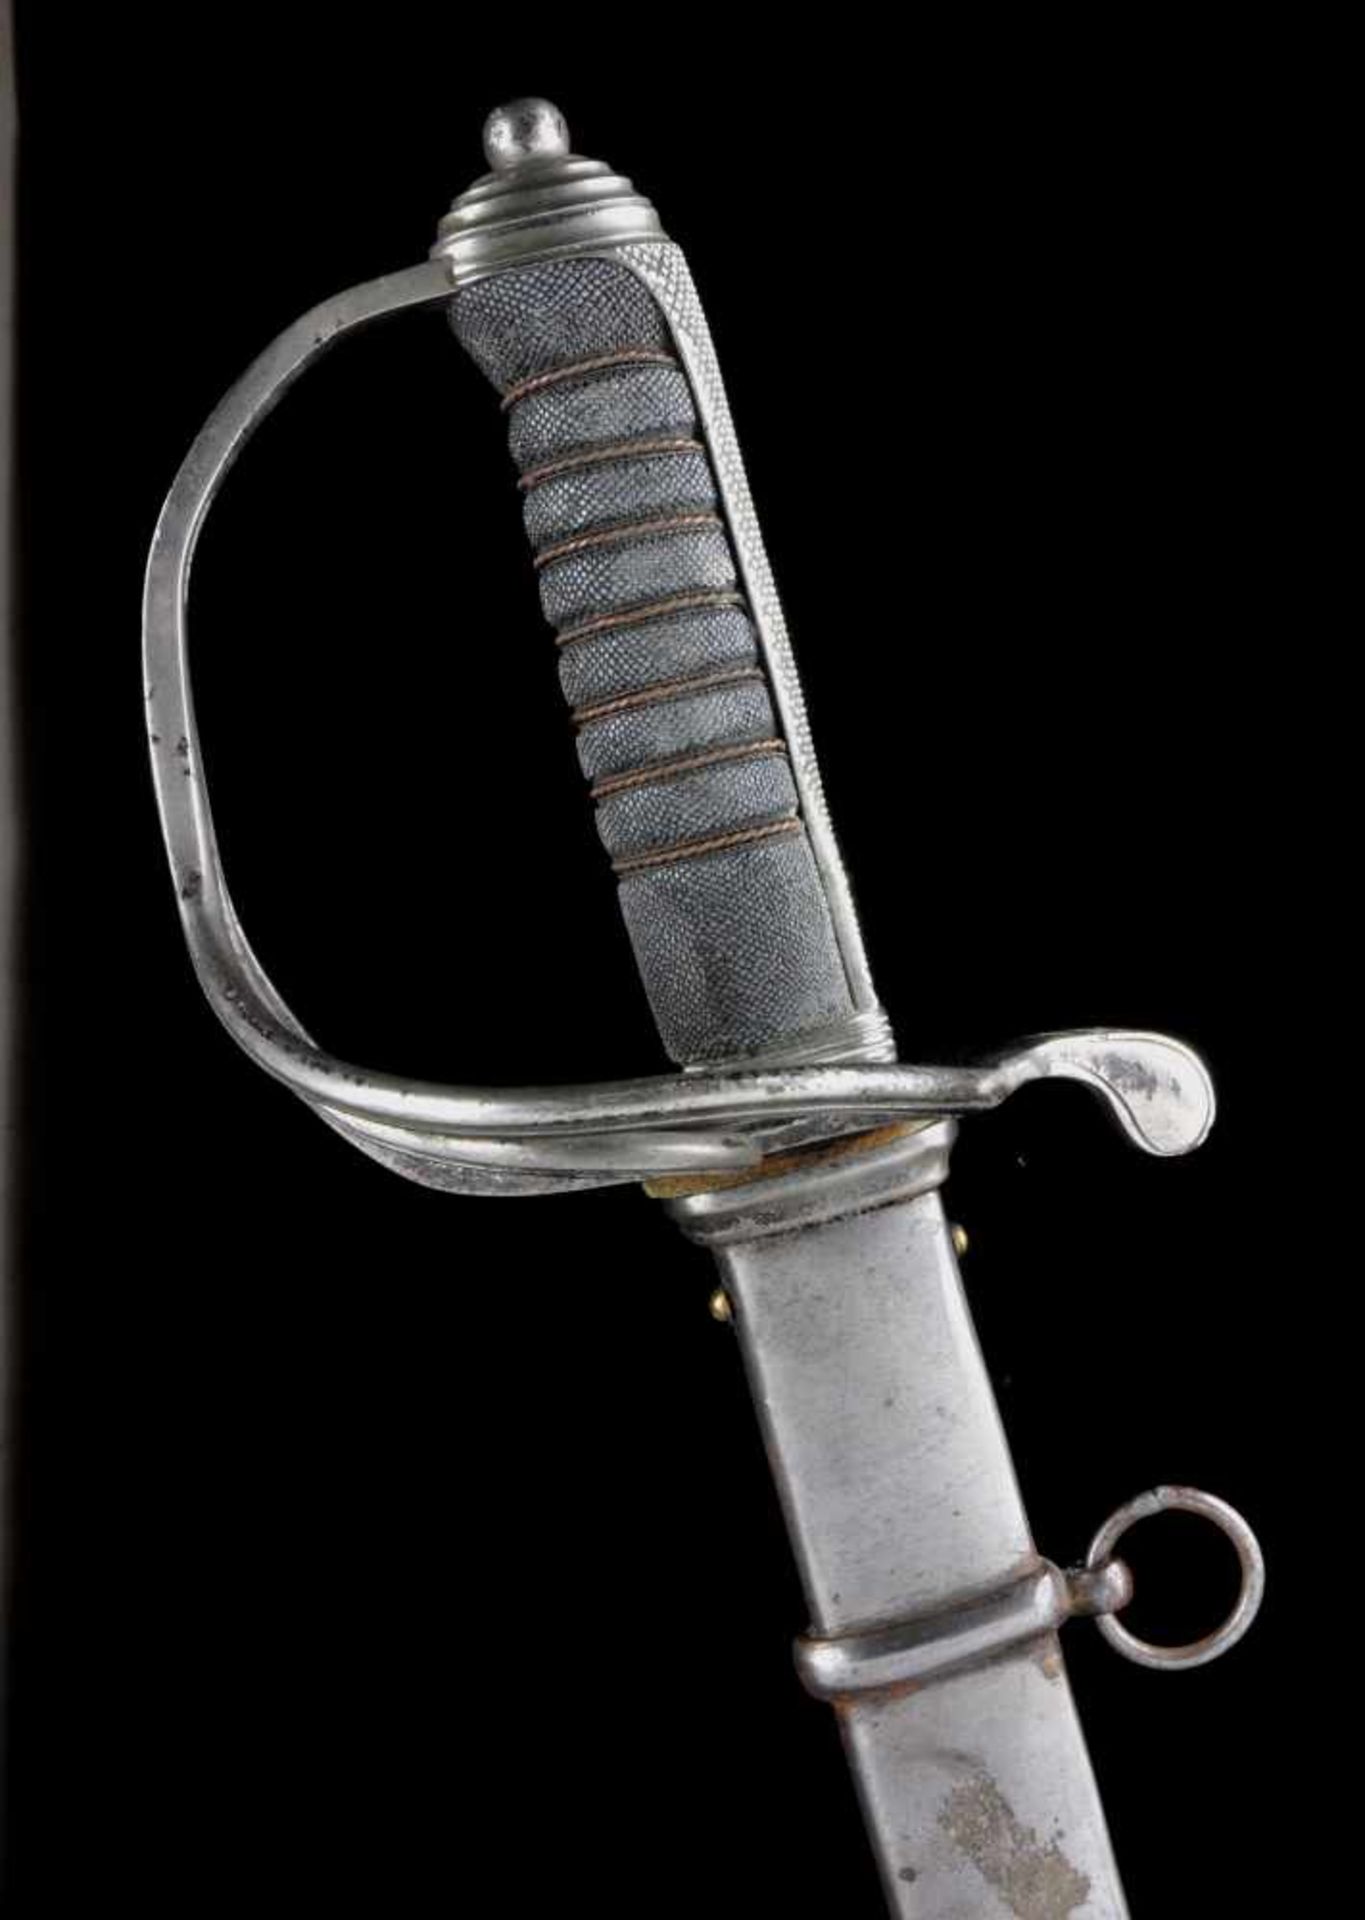 A BRITISH ROYAL ARTILLERY OFFICER’S SWORD WITH ETCHED BLADE, RETAILED BY ARMY & NAVY COOPERATIVE